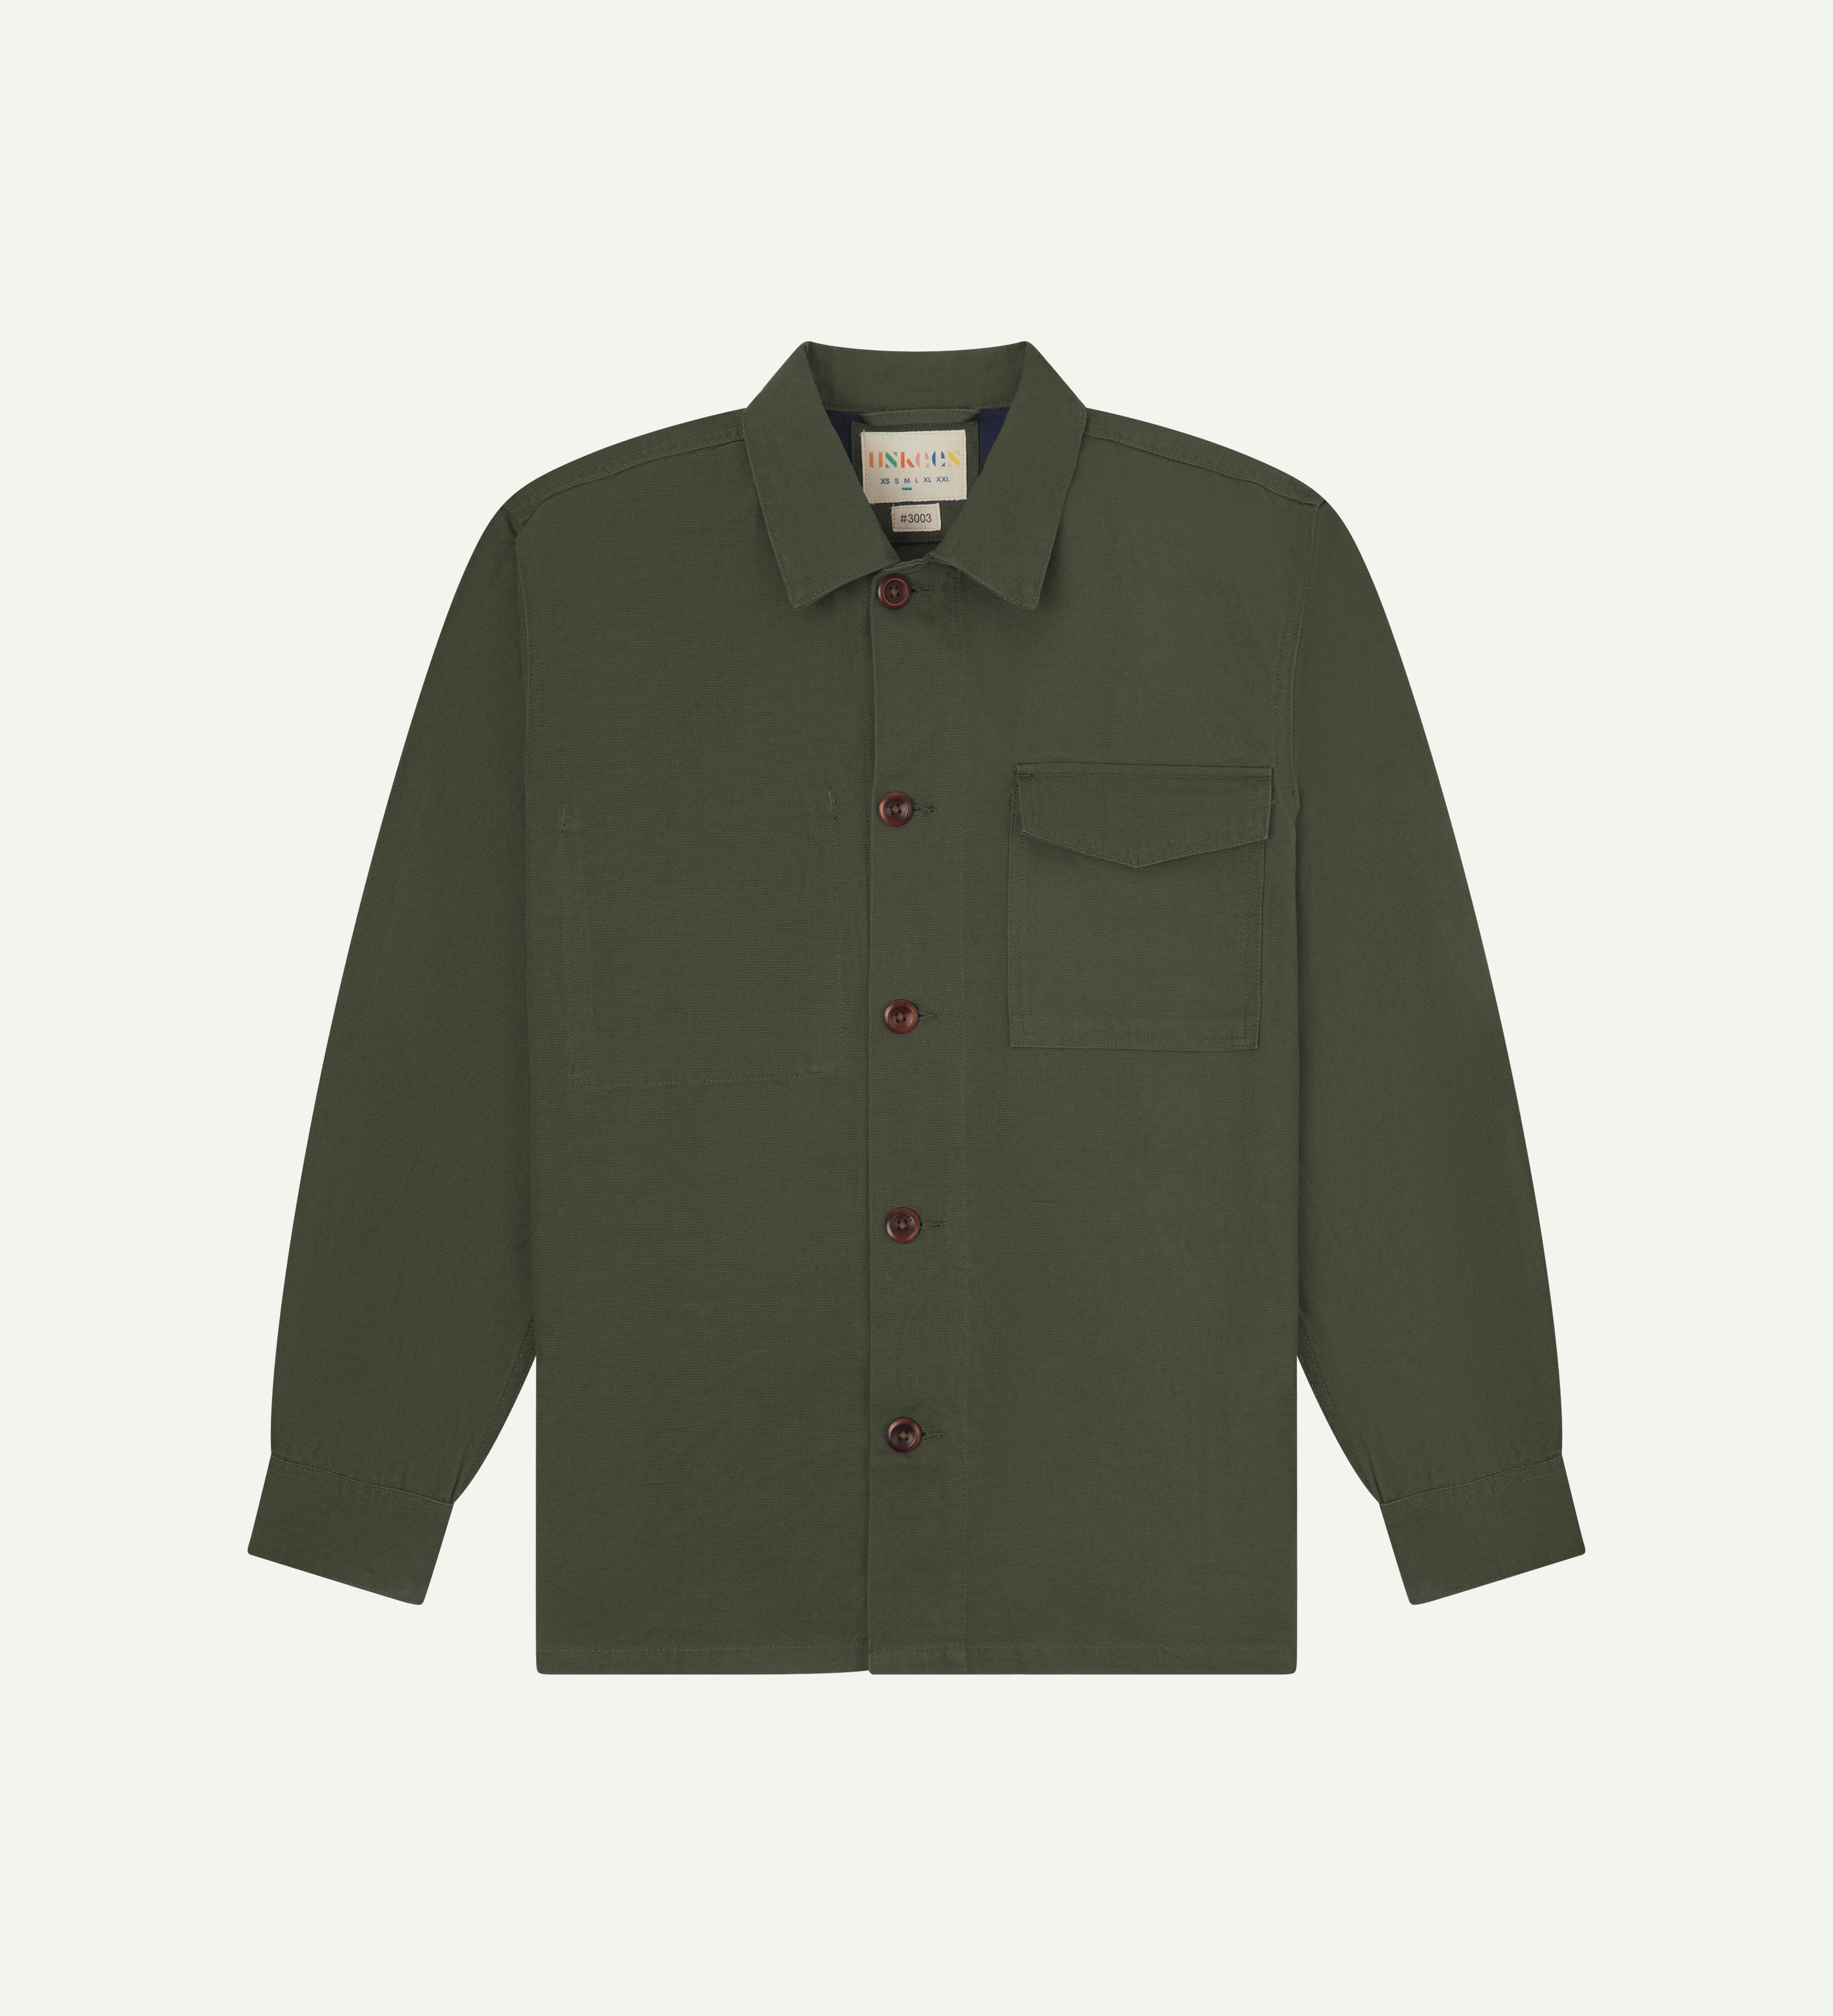 Front flat shot ofdull green #3003 men's workshirt from Uskees. Showing chest pocket with flap and corozo buttons.